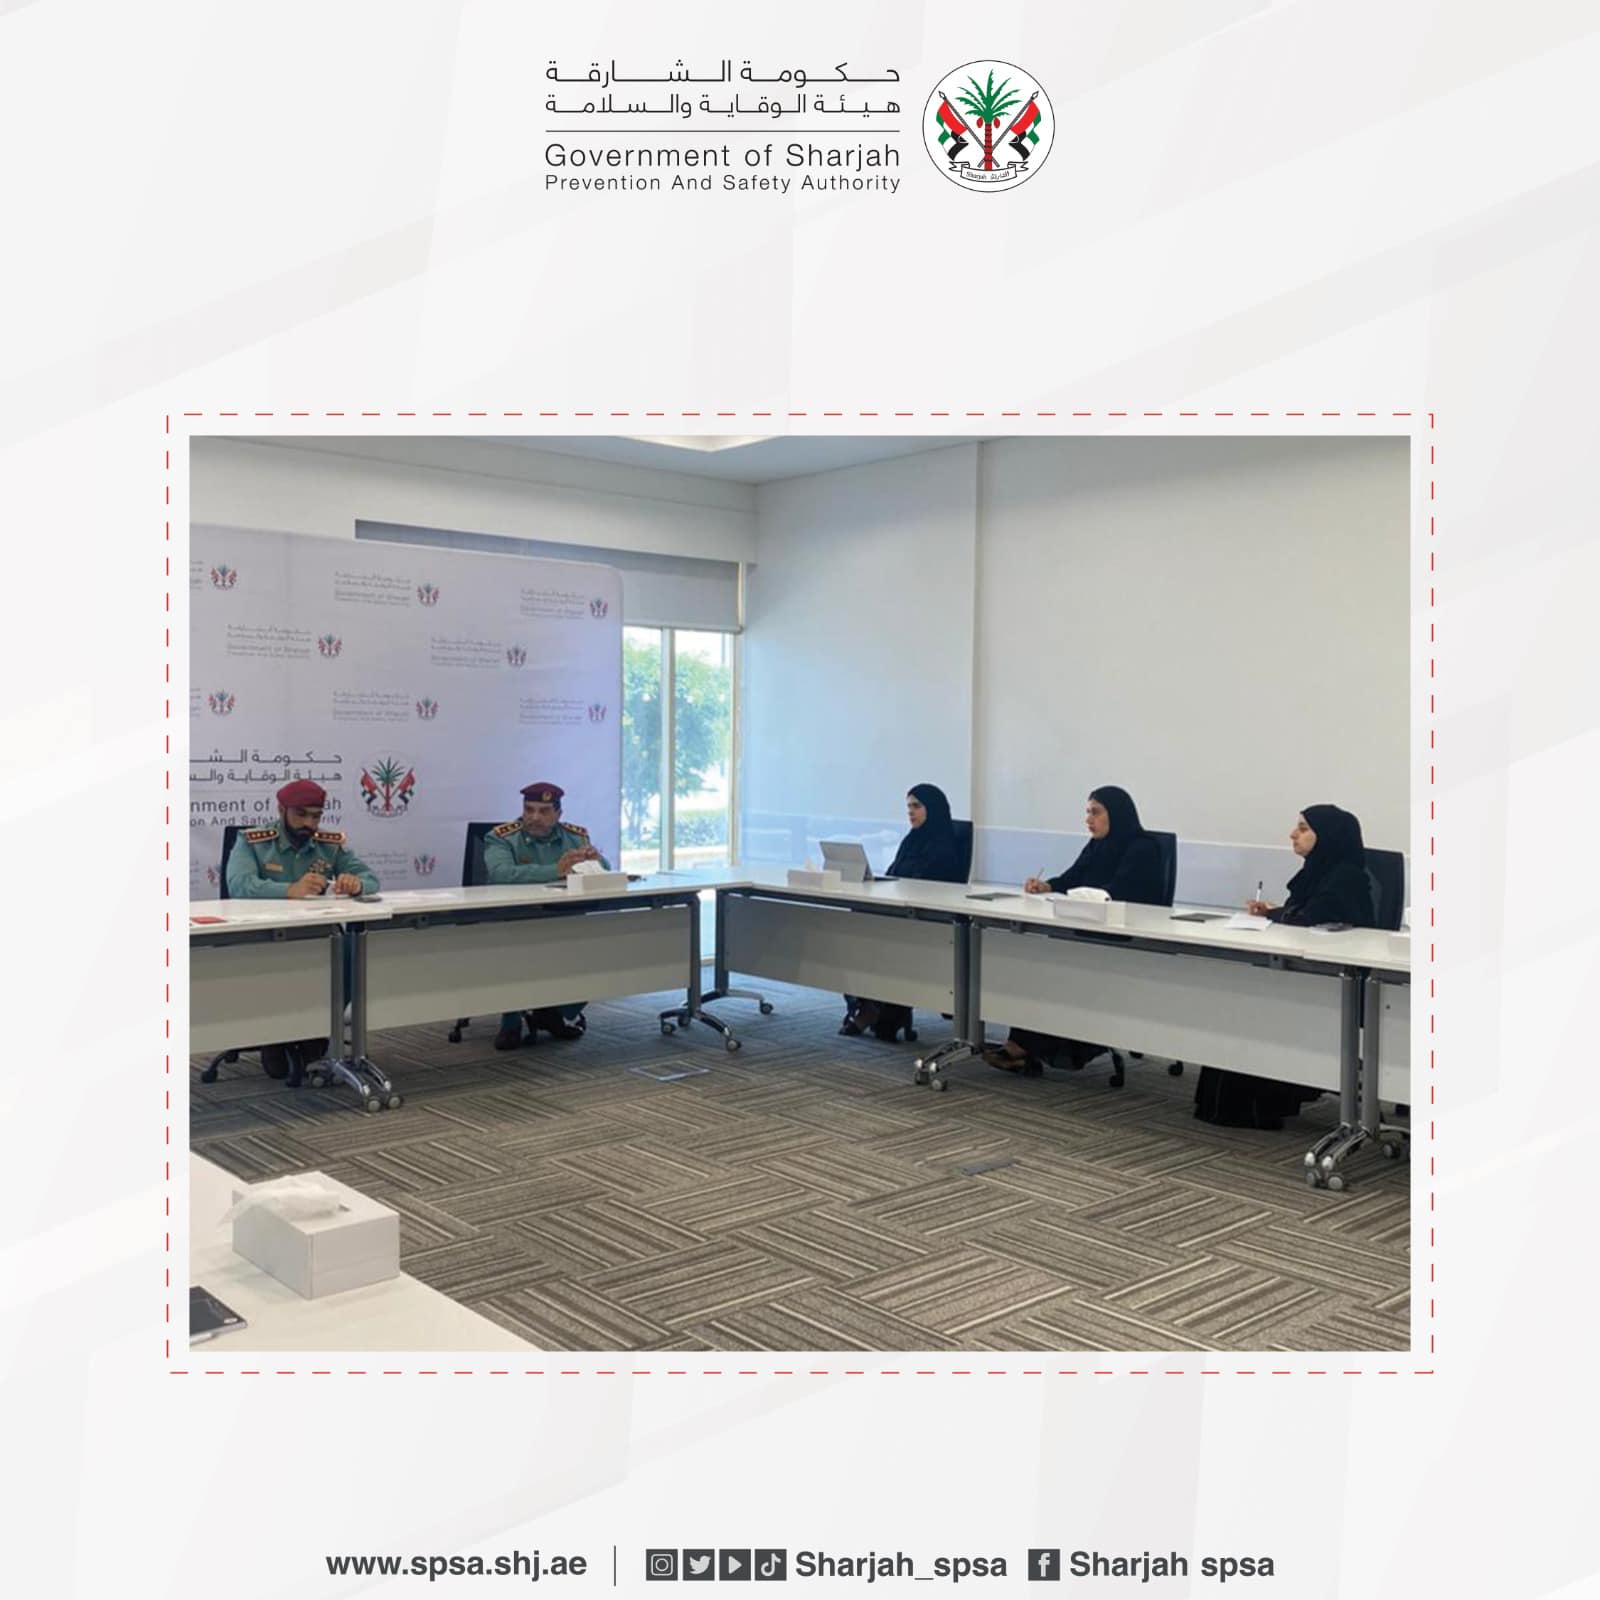 A coordination meeting between the Prevention and Safety Authority and the Sharjah Police General Command